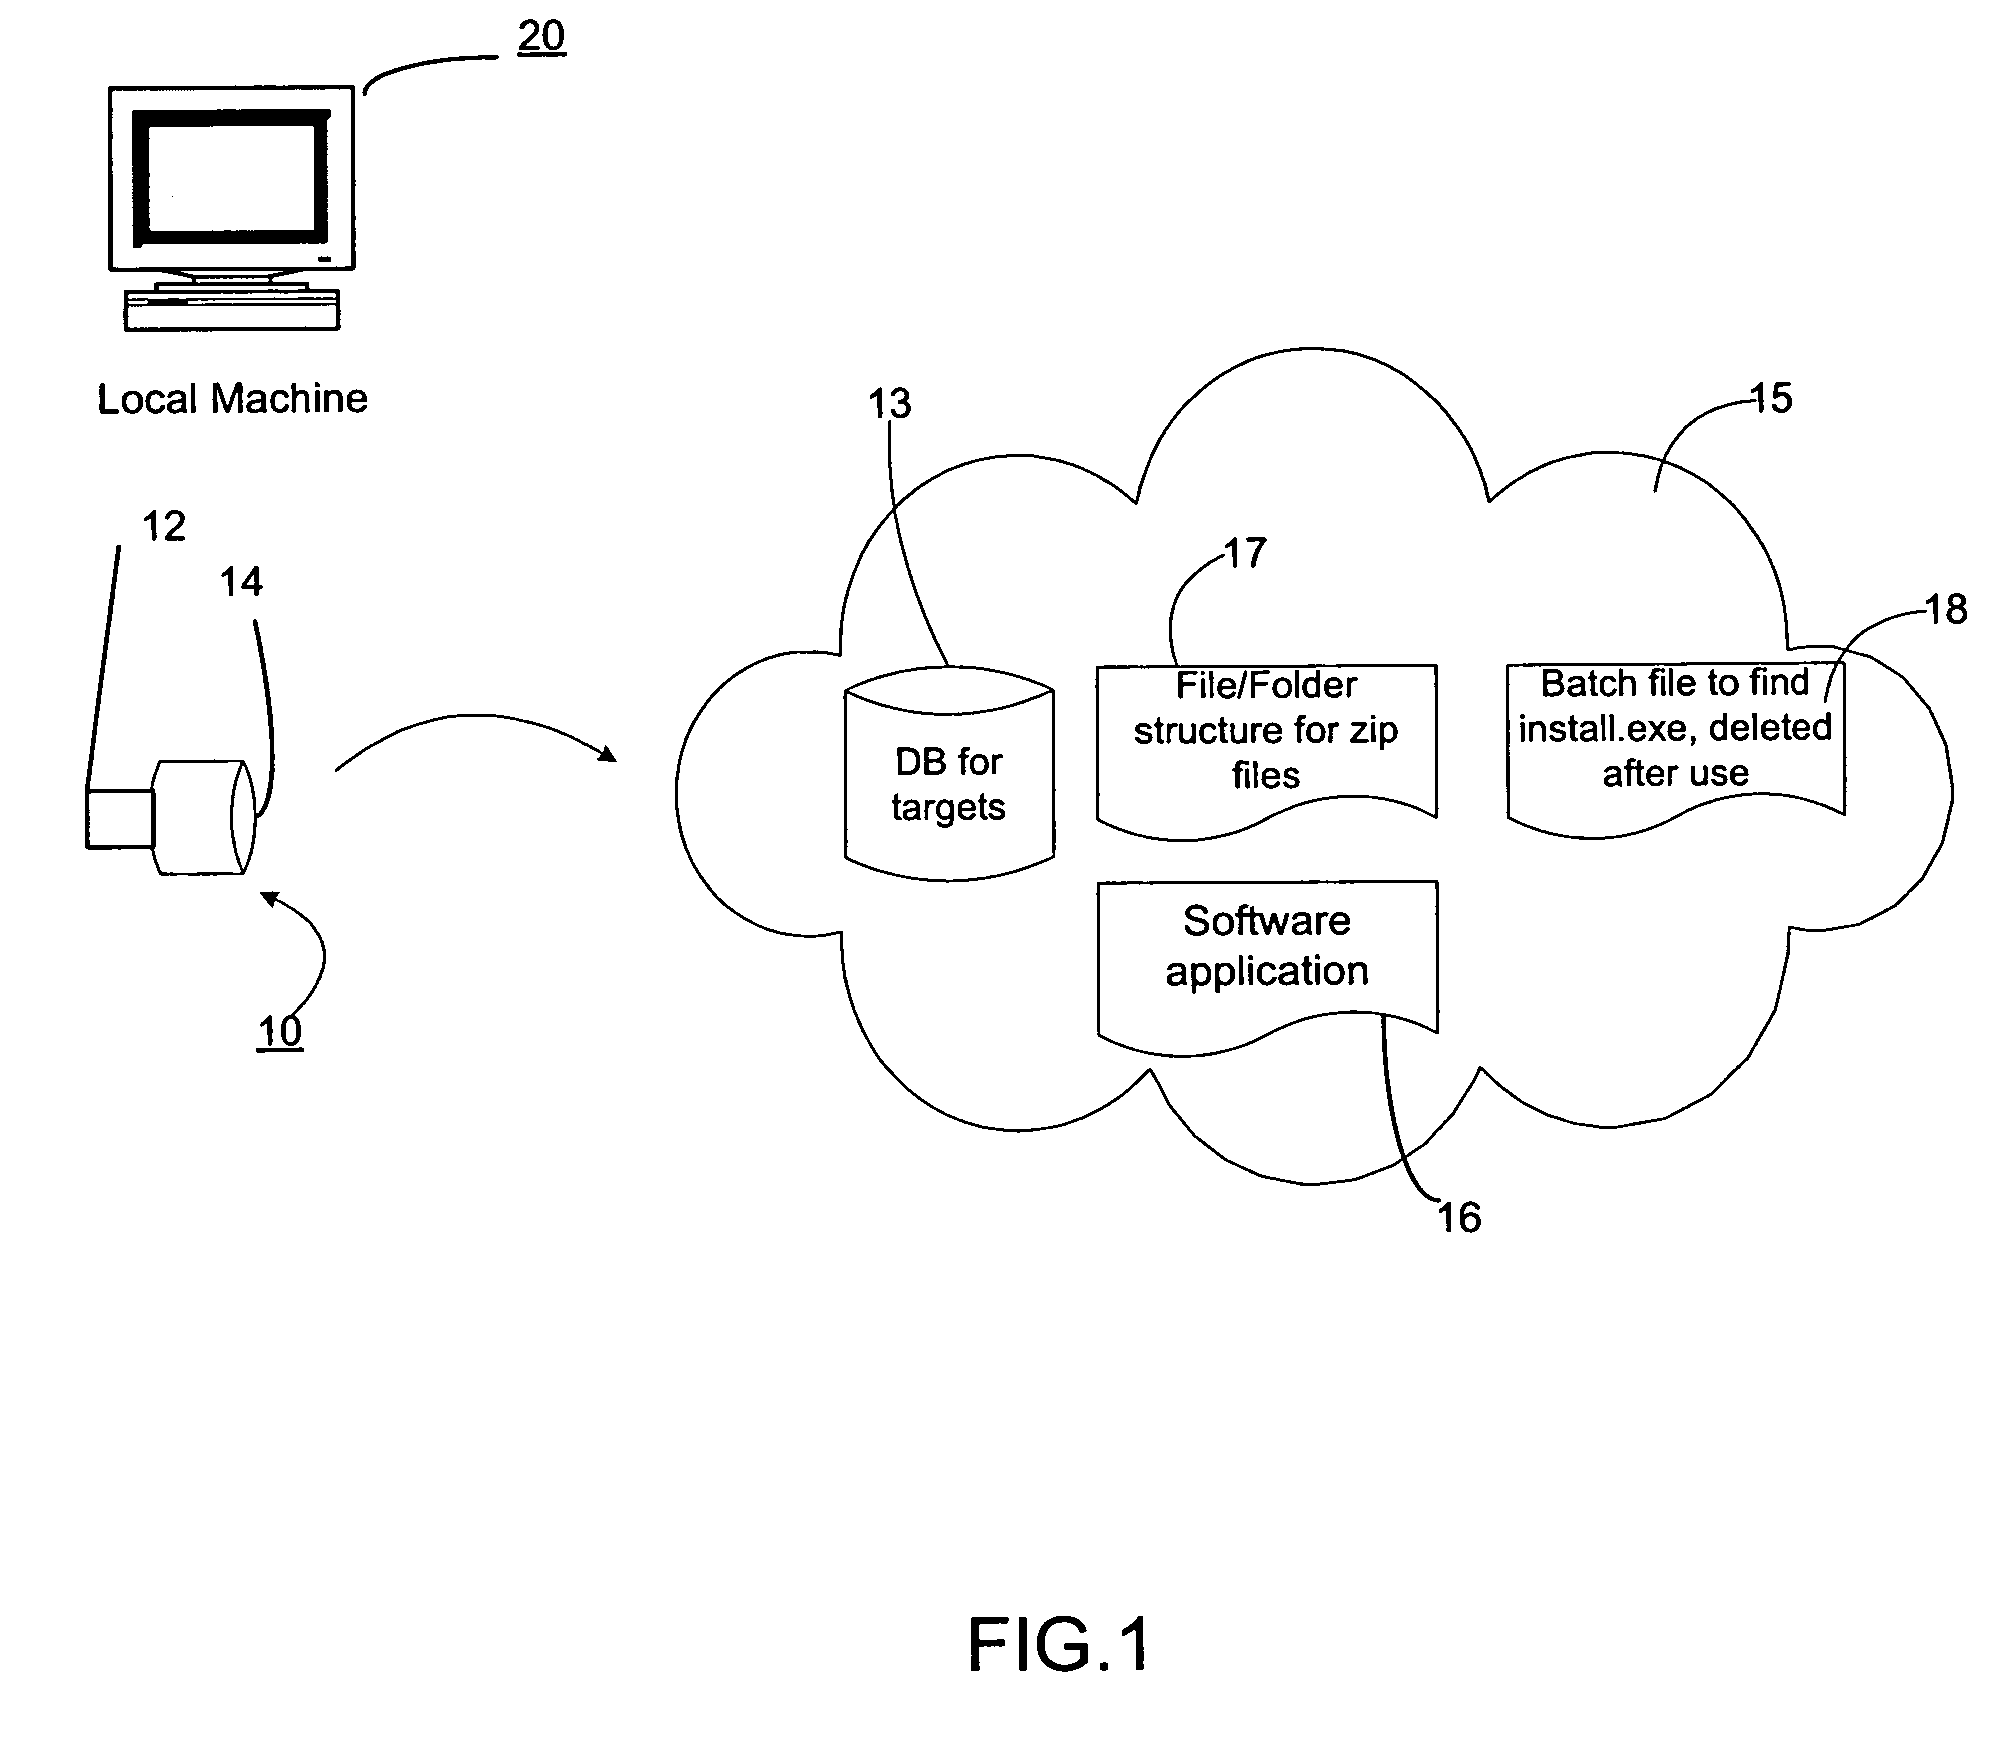 Apparatus and method for backing up computer files